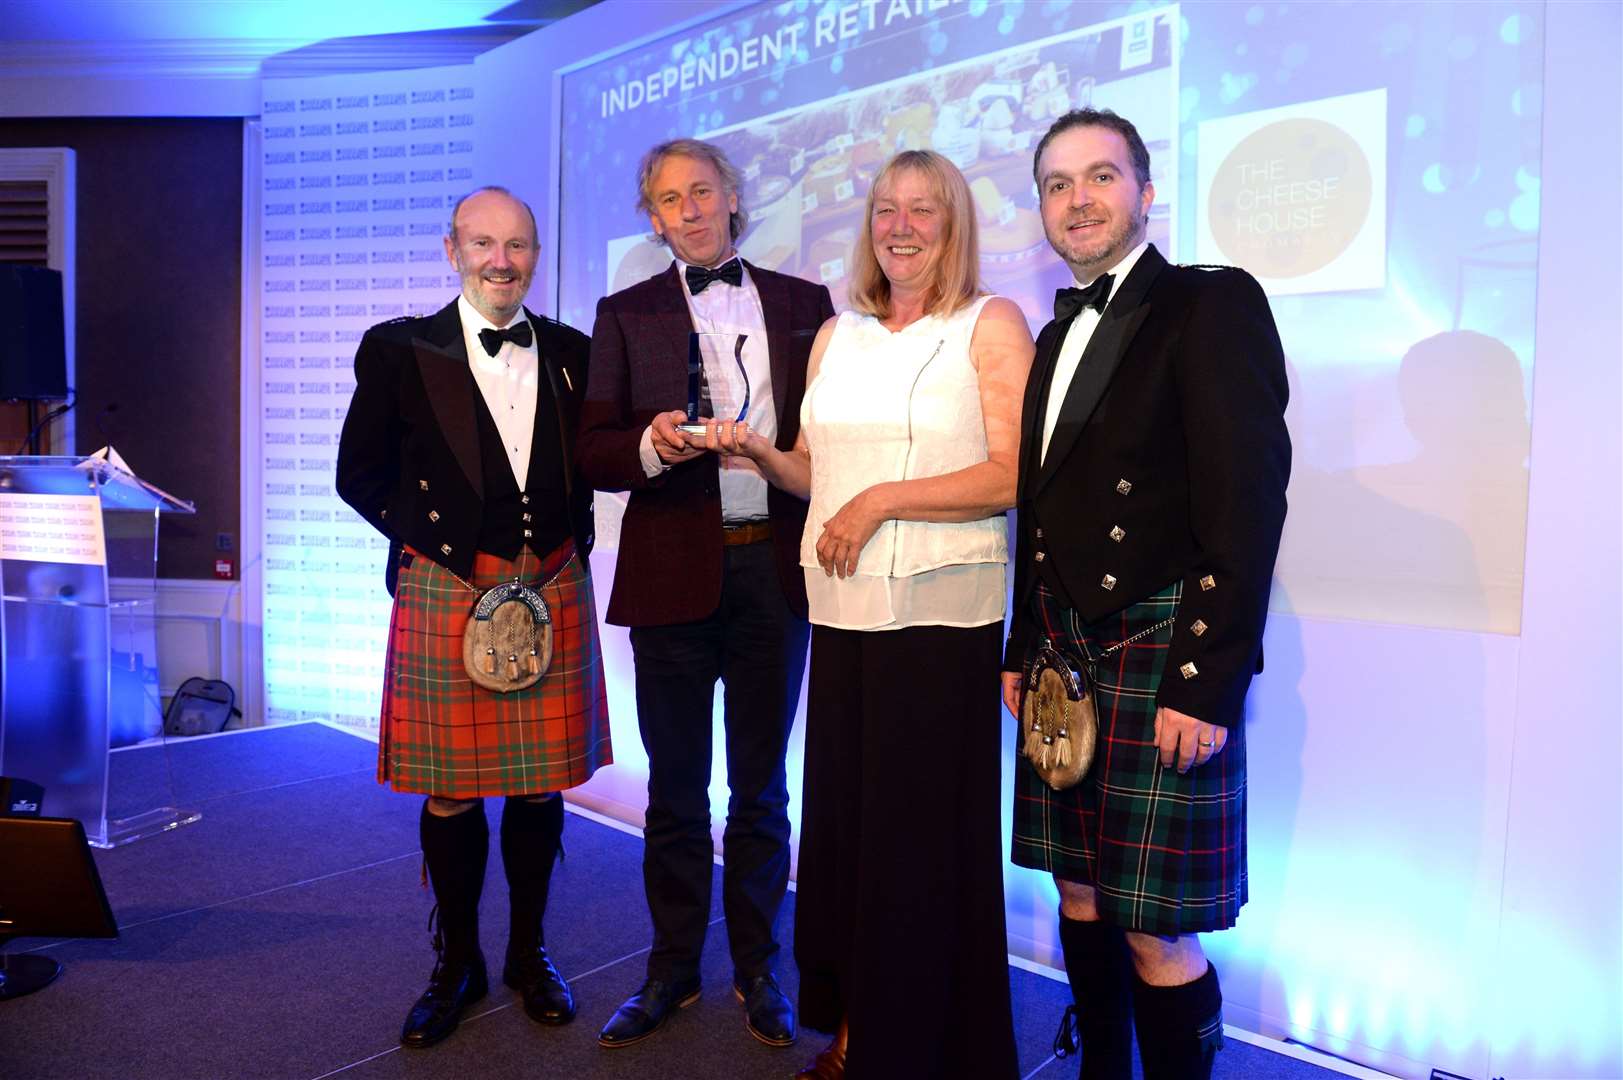 Jon and Emmy Palmer collected an Independent Retailer of the Year accolade at the Highlands & Islands Food & Drink Awards in 2016. It was presented by Steve Barron, now Highland News and Media's managing director.